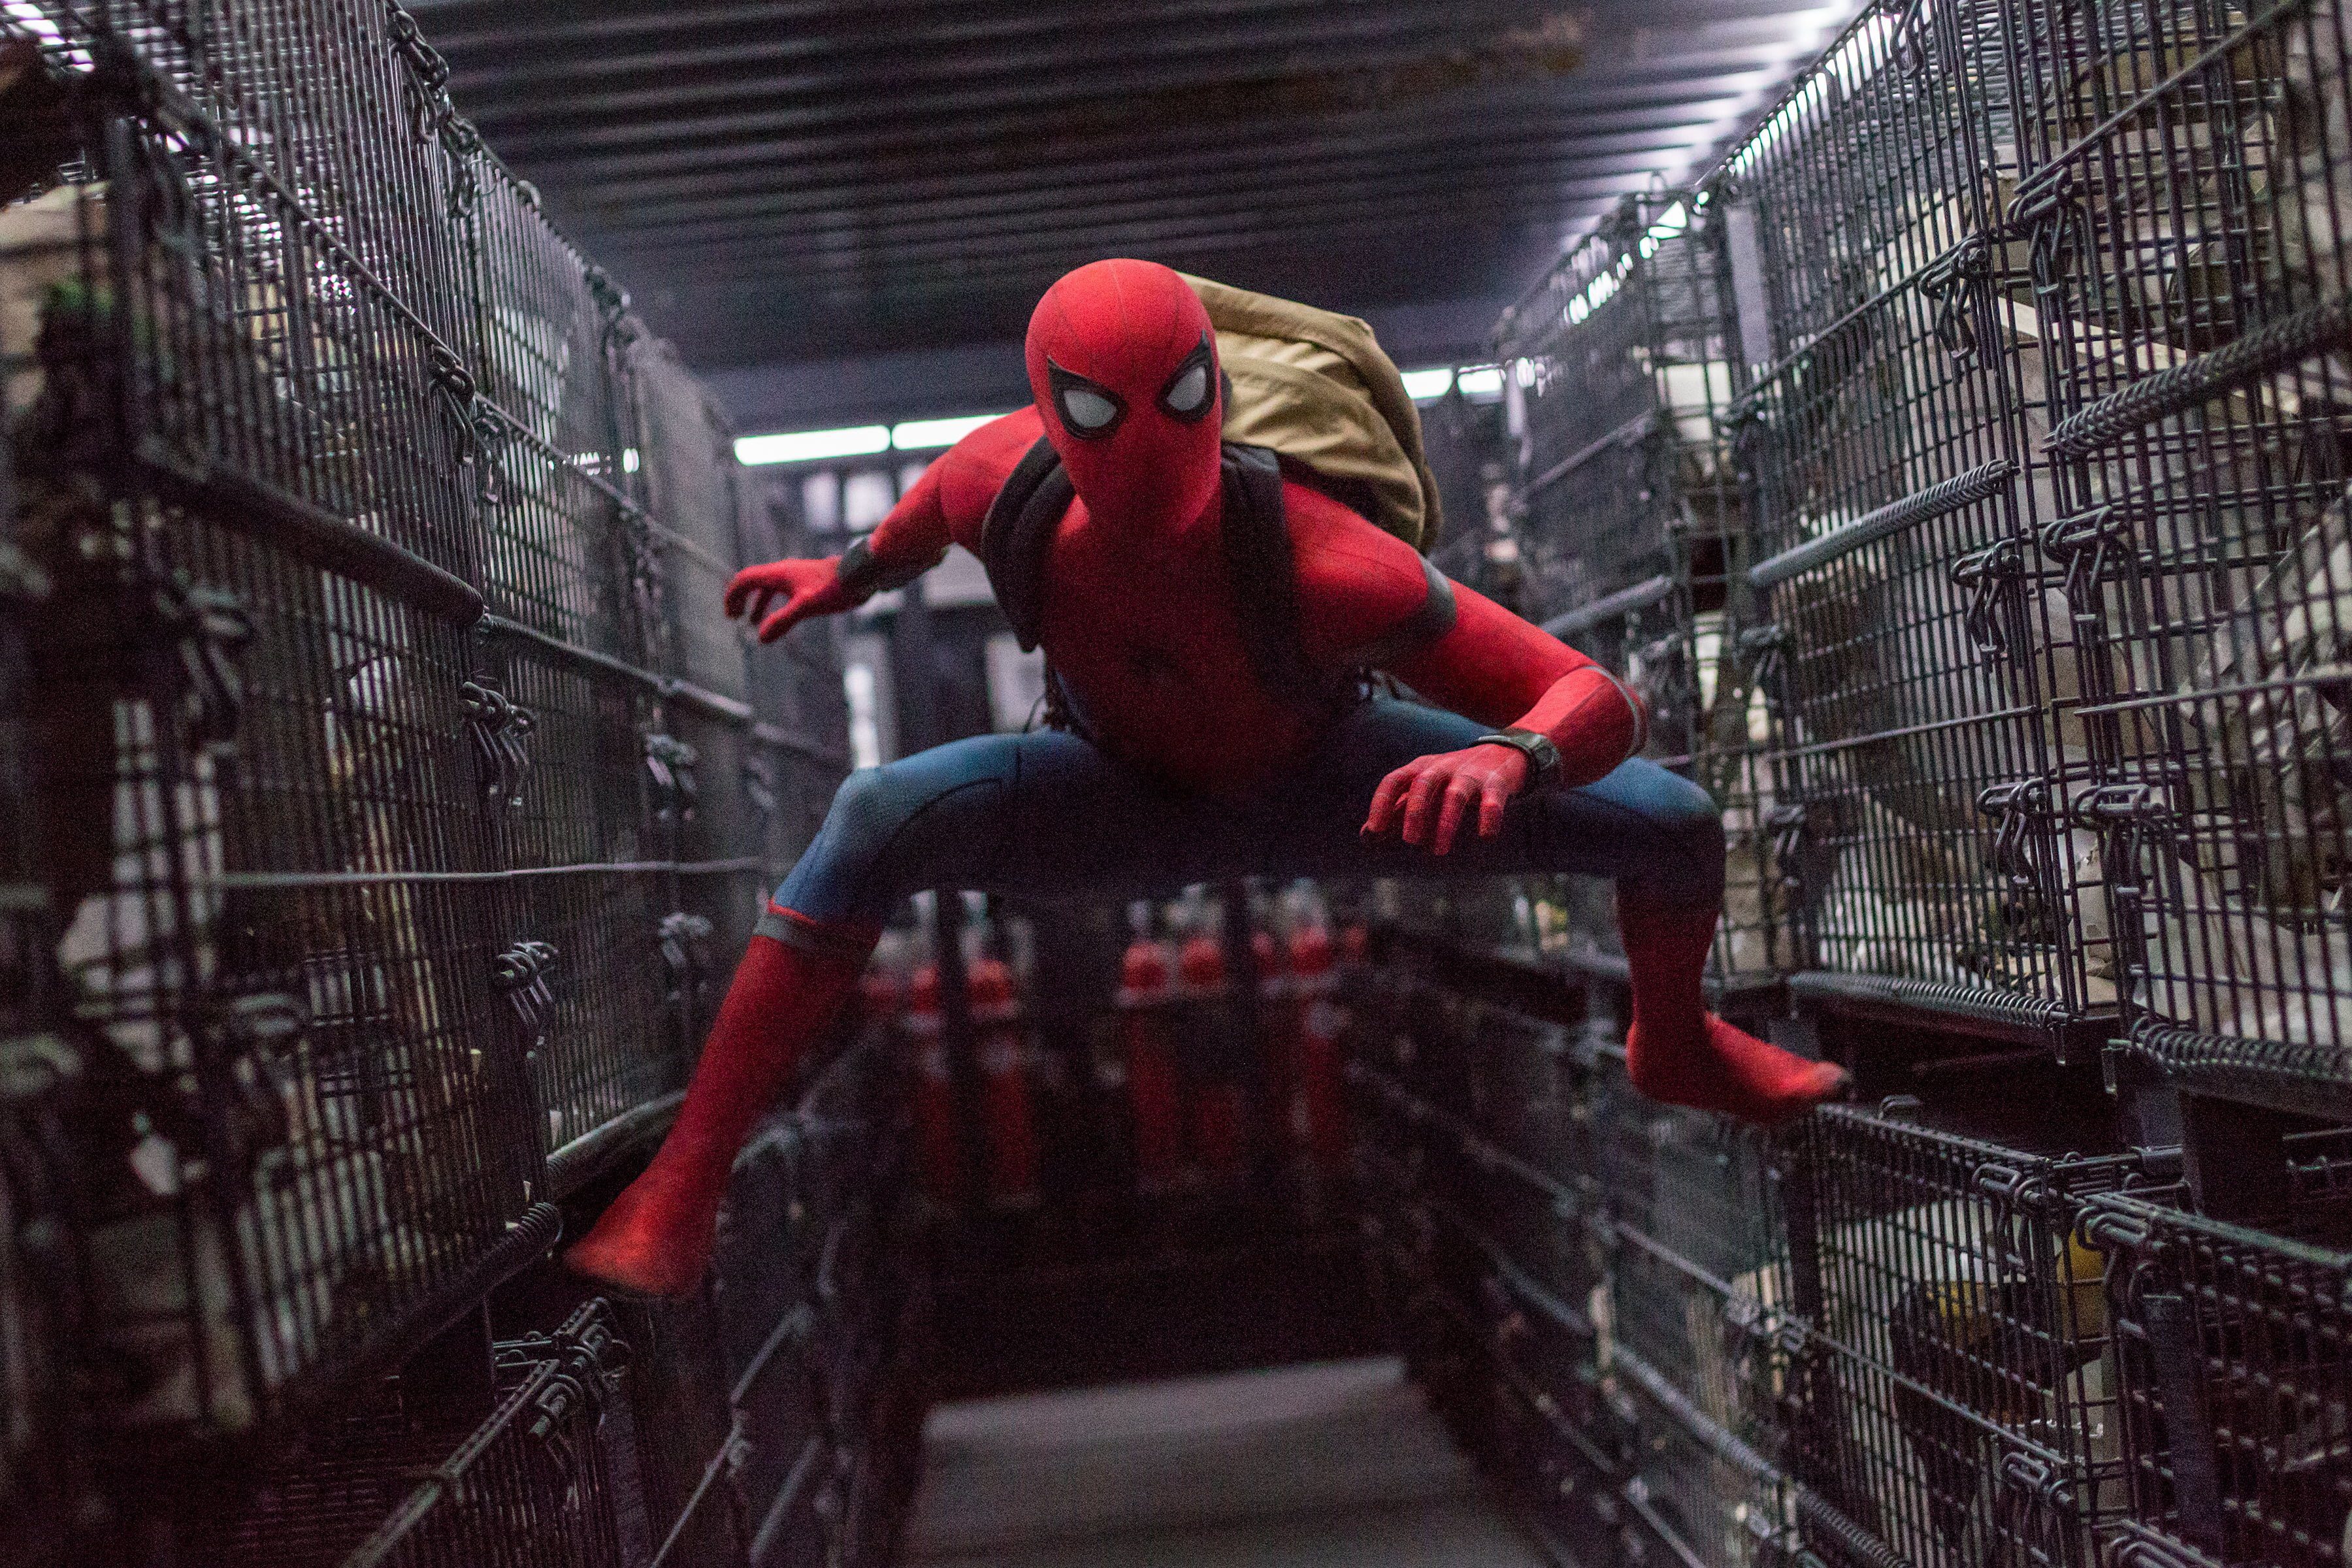 Tom Holland stars as Spider-Man in Columbia Pictures’ “Spider-Man: Homecoming.”